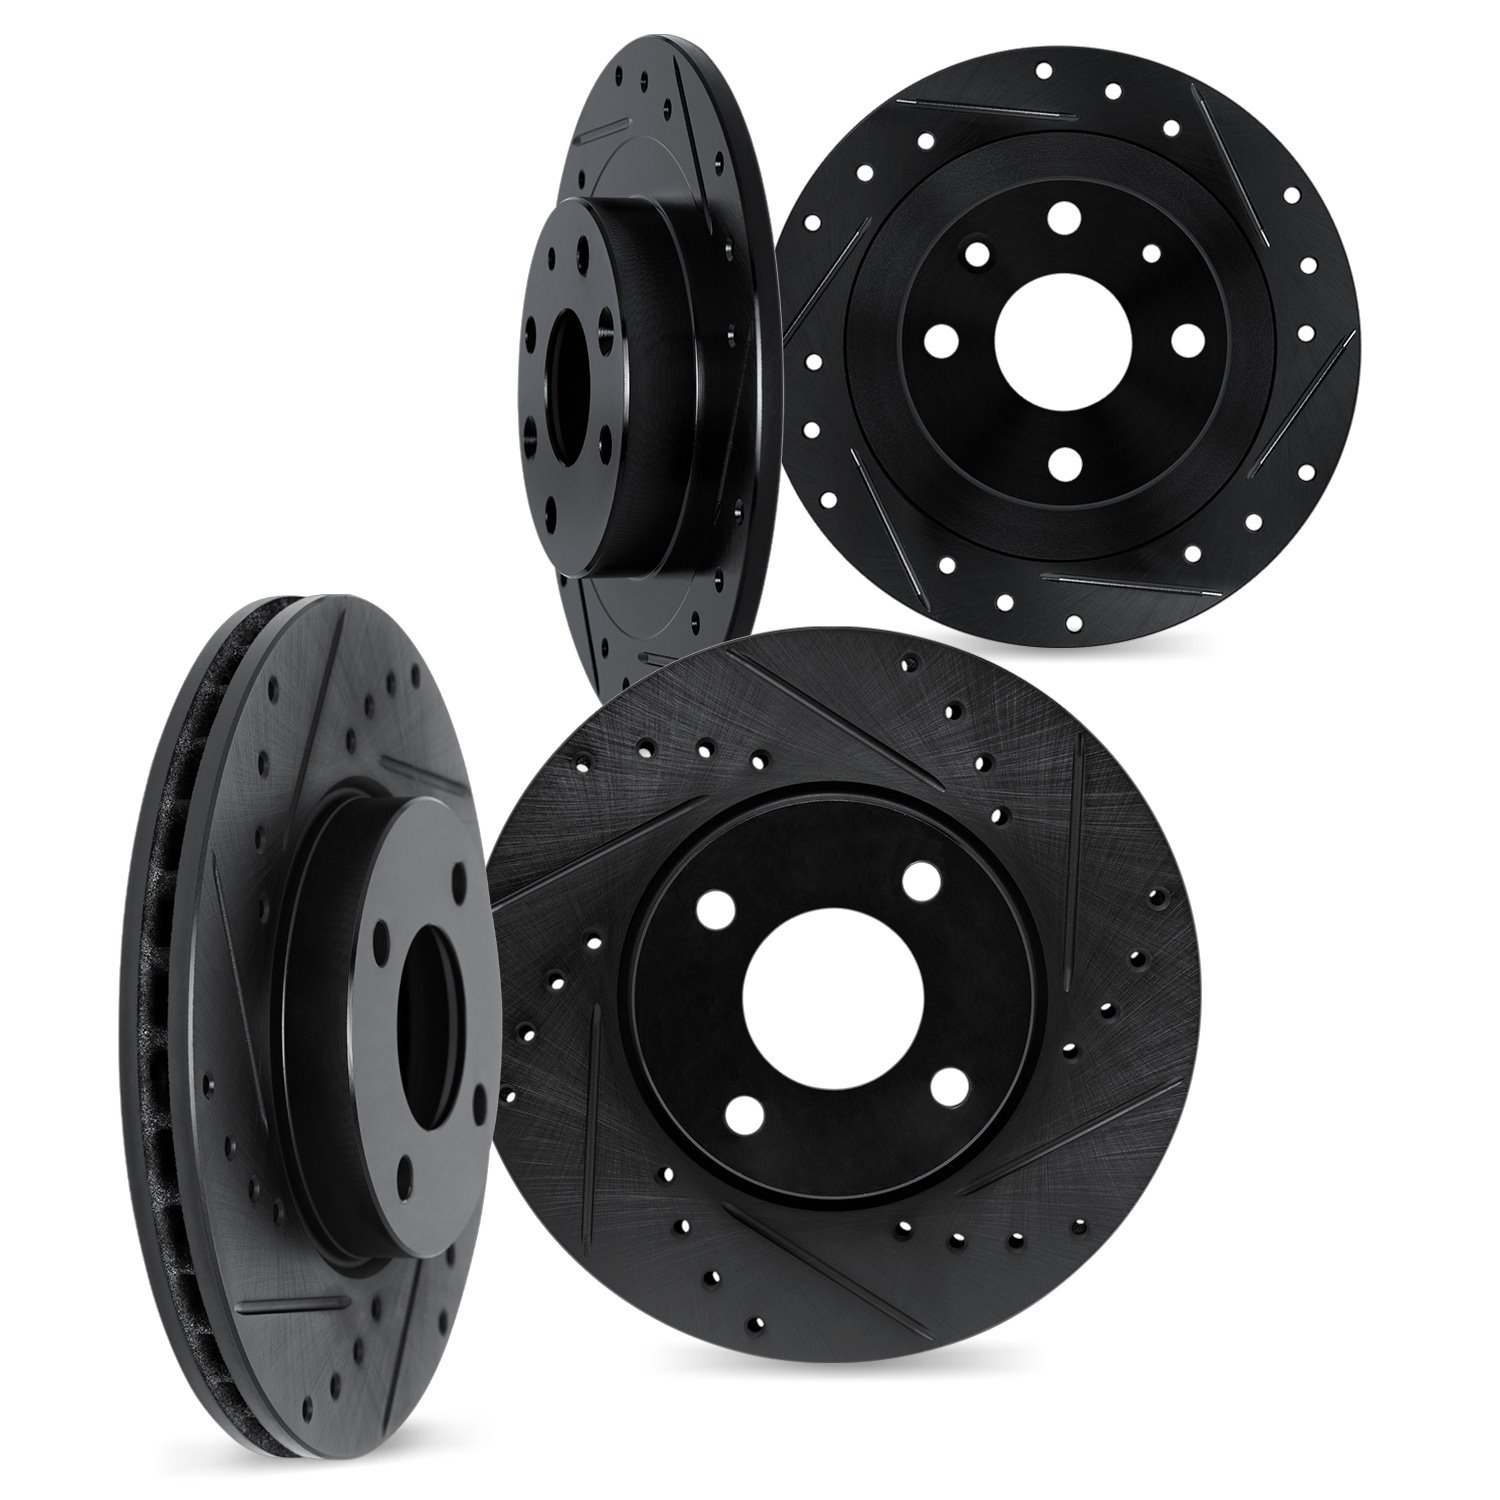 8004-80001 Drilled/Slotted Brake Rotors [Black], Fits Select Multiple Makes/Models, Position: Front and Rear